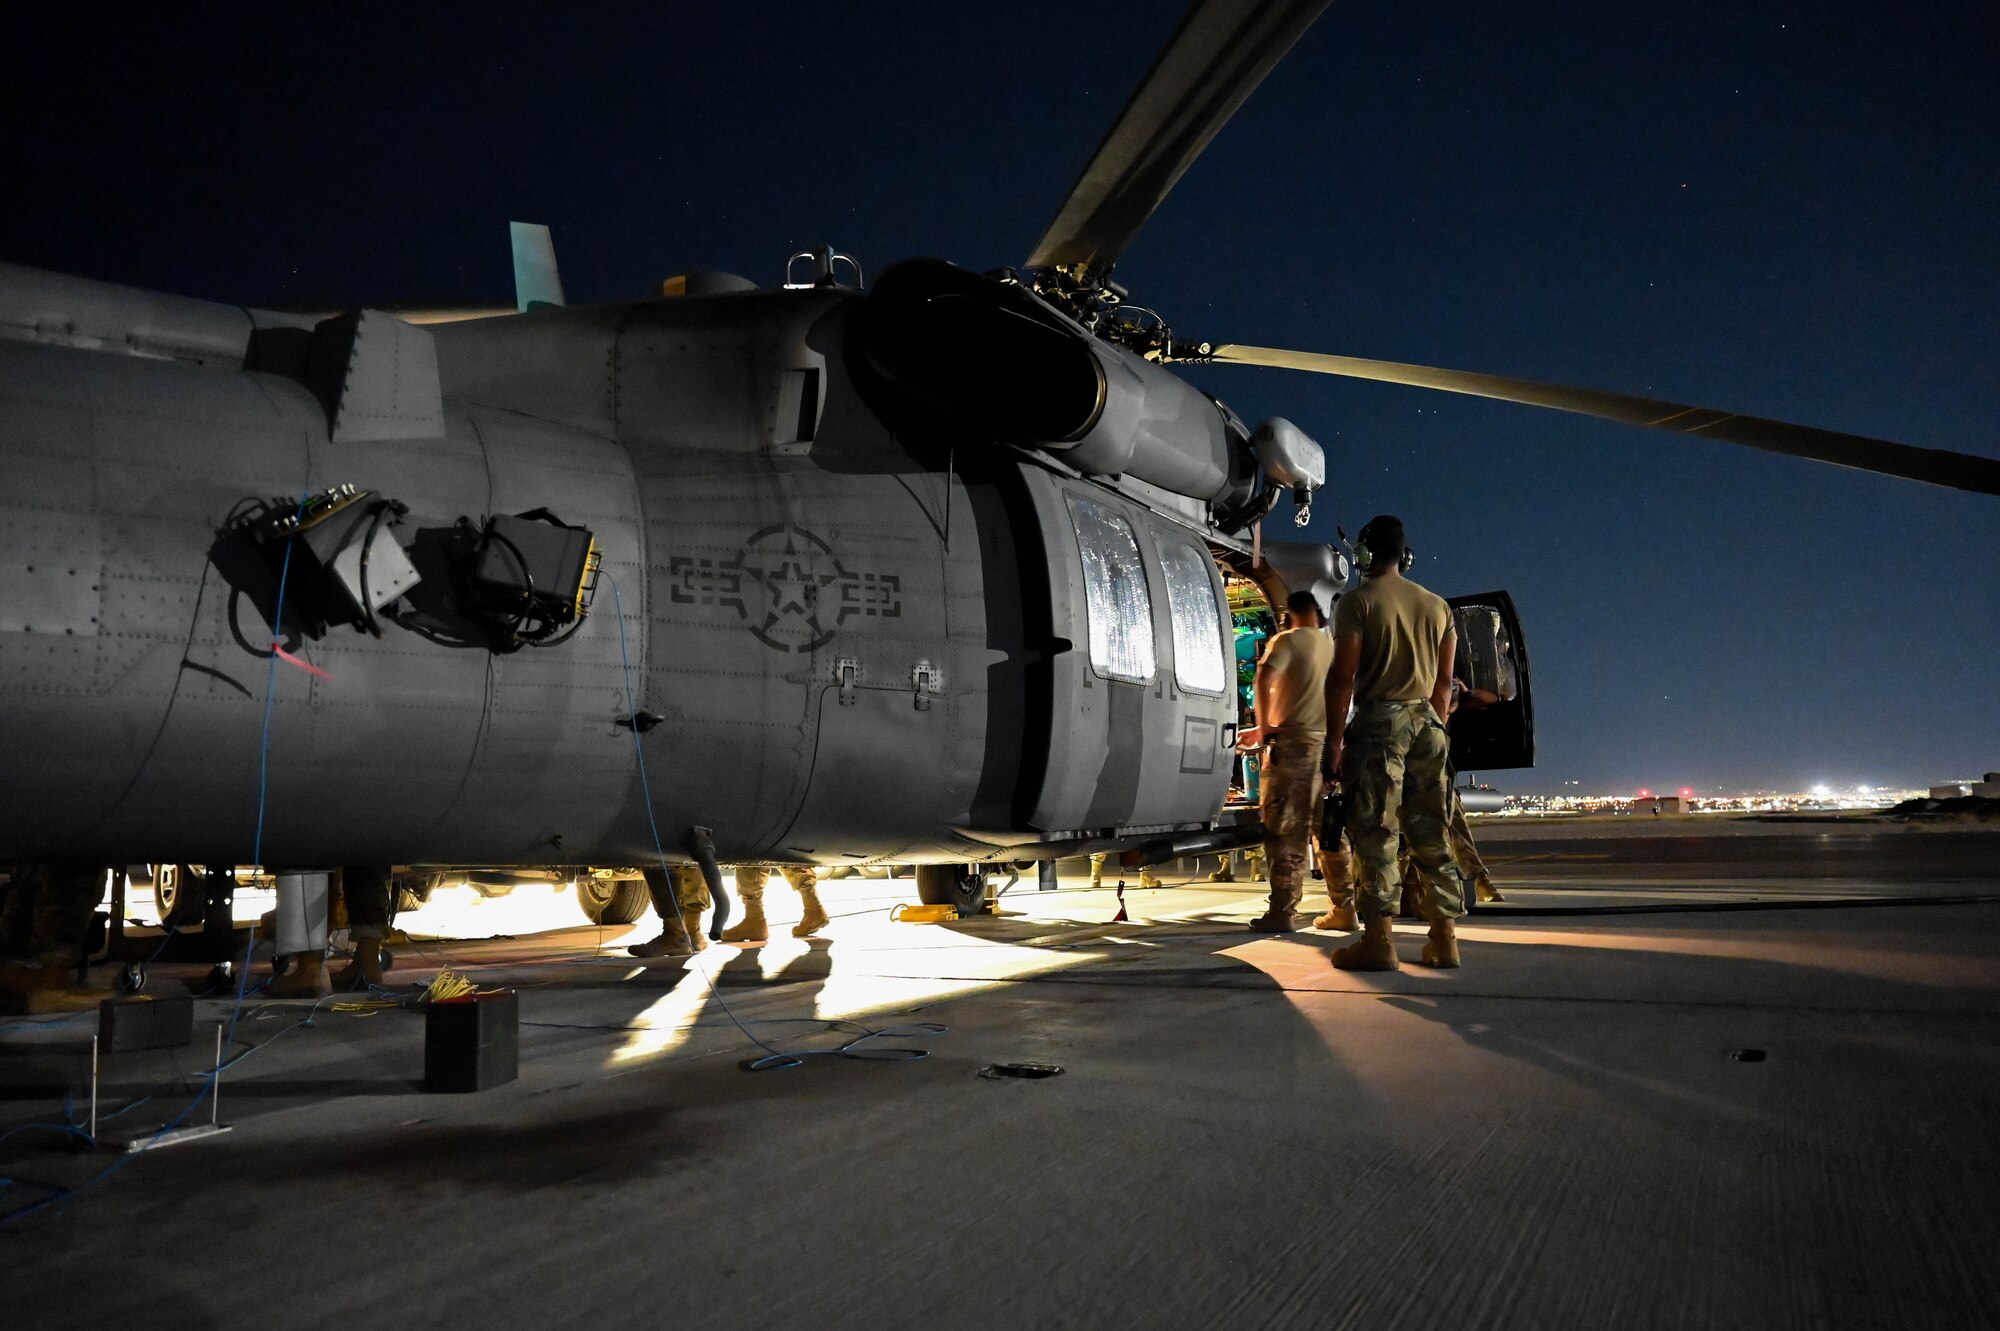 Airmen from the 87th Electronic Warfare Squadron assess the electronic warfare sensors of an HH-60G Pavehawk as part of COMBAT SHIELD during Red Flag 23-3 at Nellis Air Force Base, Nev., July 13, 2023. This Red Flag concentrated on three primary themes: defensive counter-air, offensive counter-air suppression of enemy air defenses, and offensive counter air-air interdiction. (U.S. Air Force photo by Capt. Benjamin Aronson)